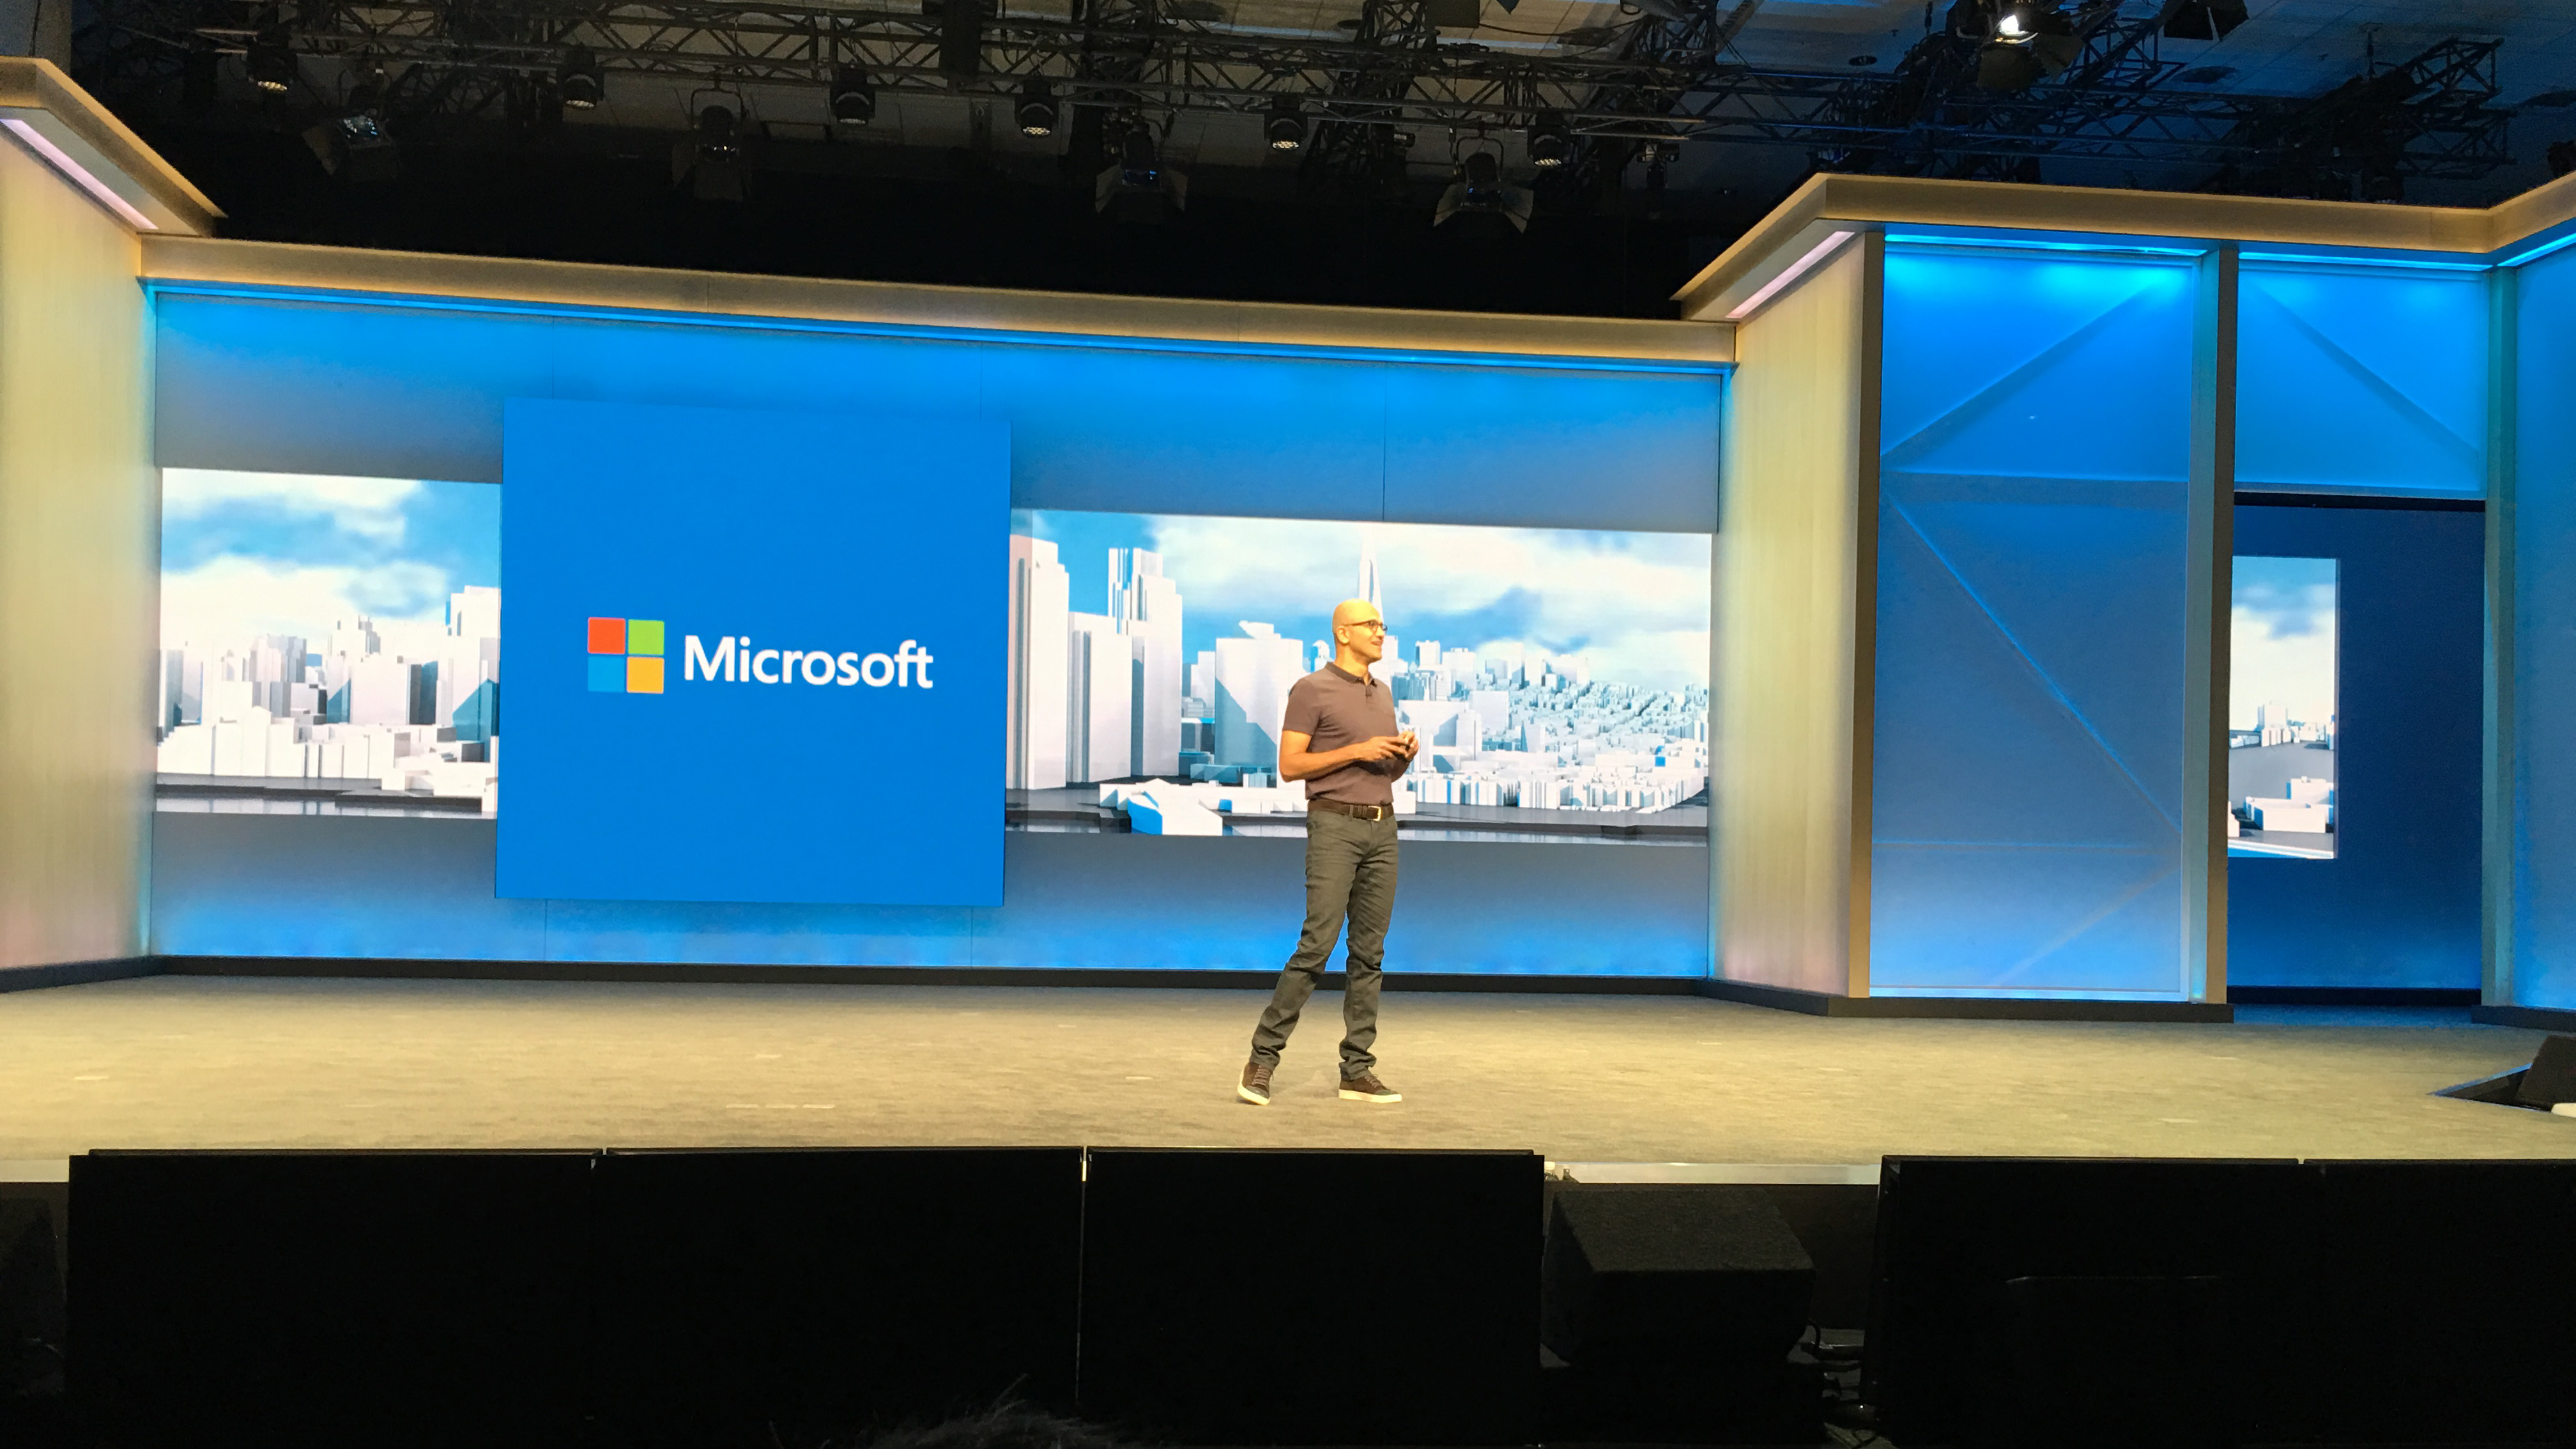 Build 2016 is a Peek at the Future of Microsoft